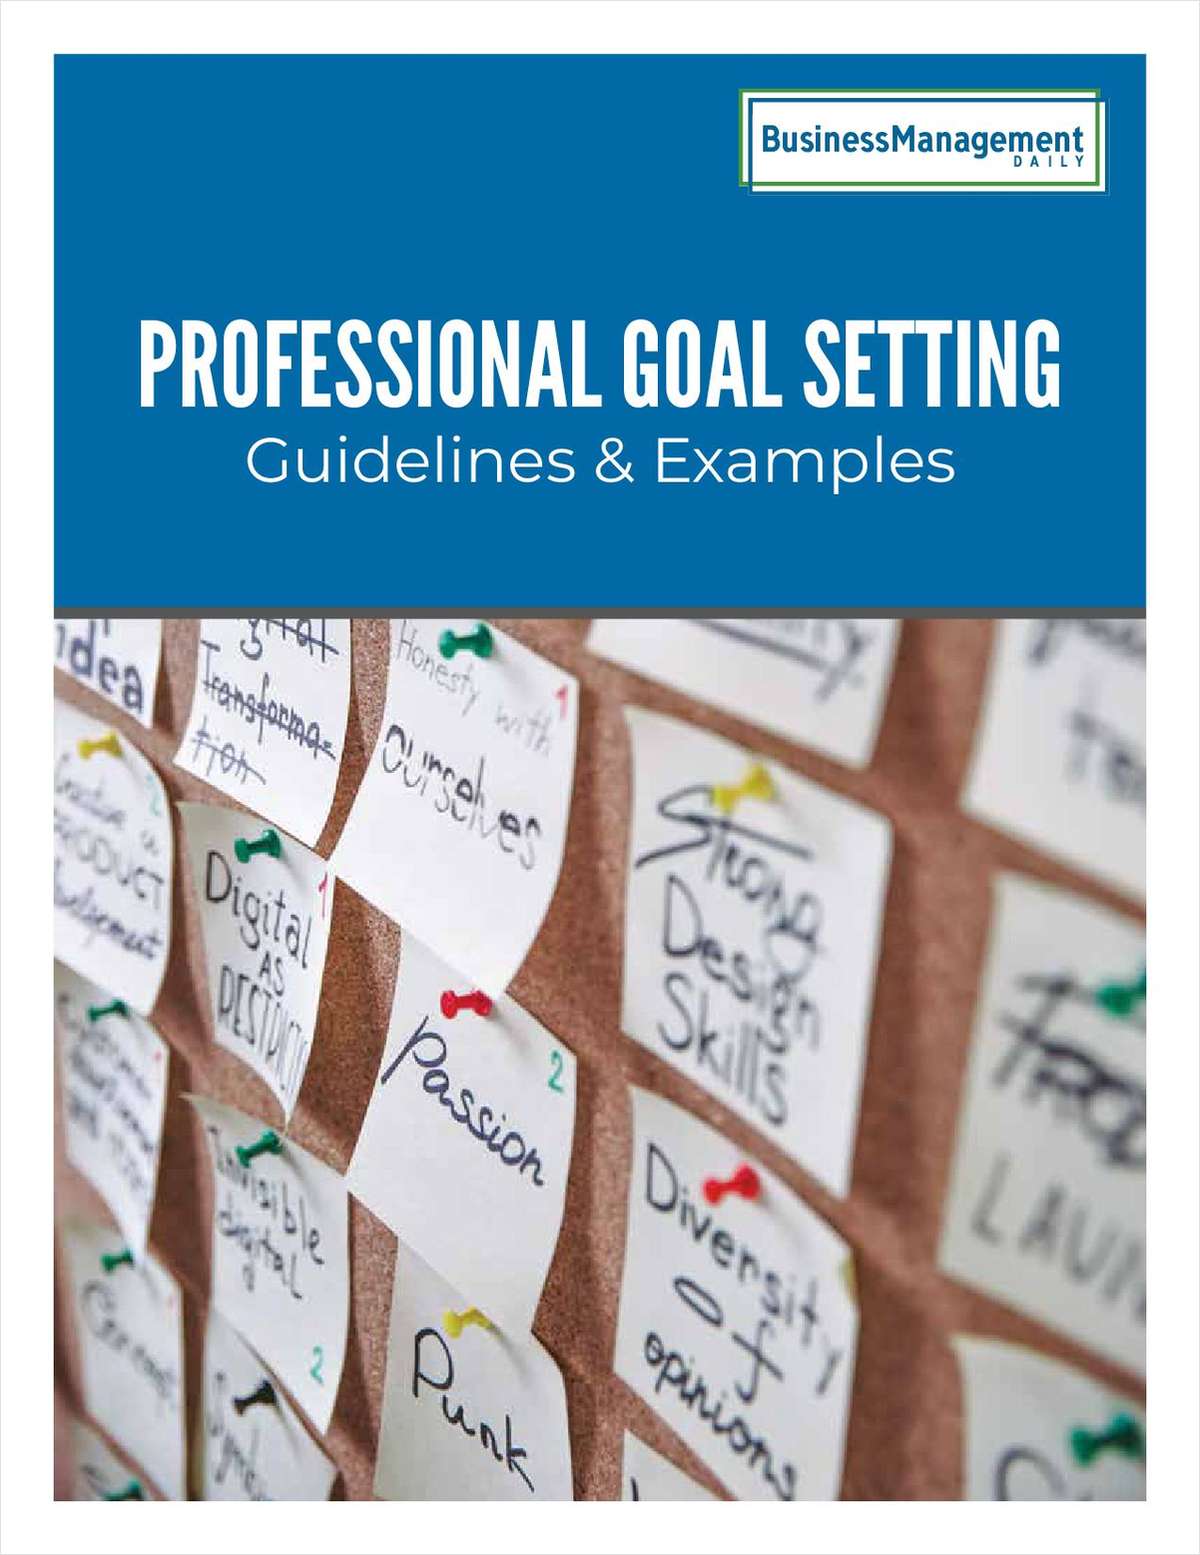 Professional Goal Setting -- Guidelines & Examples